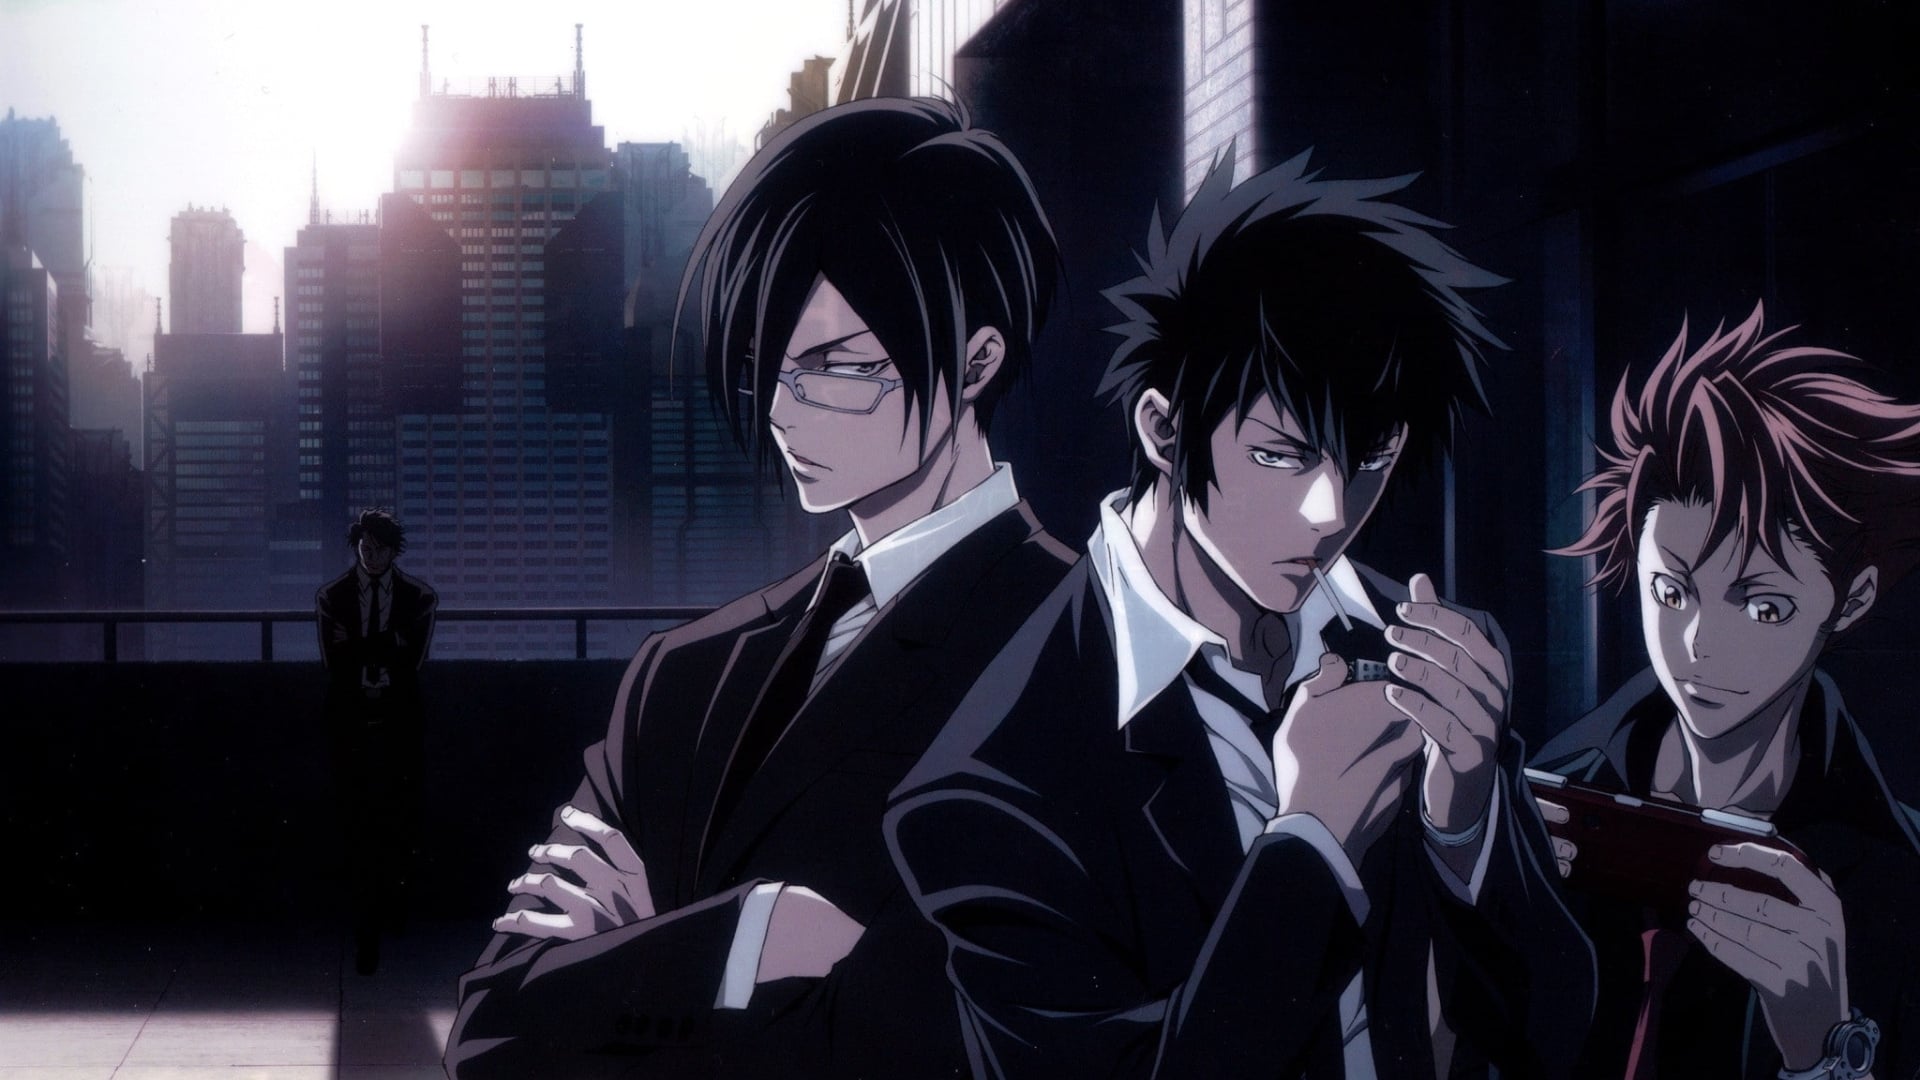 Watch Psycho-Pass Extended Edition full episodes online in English kissanim...